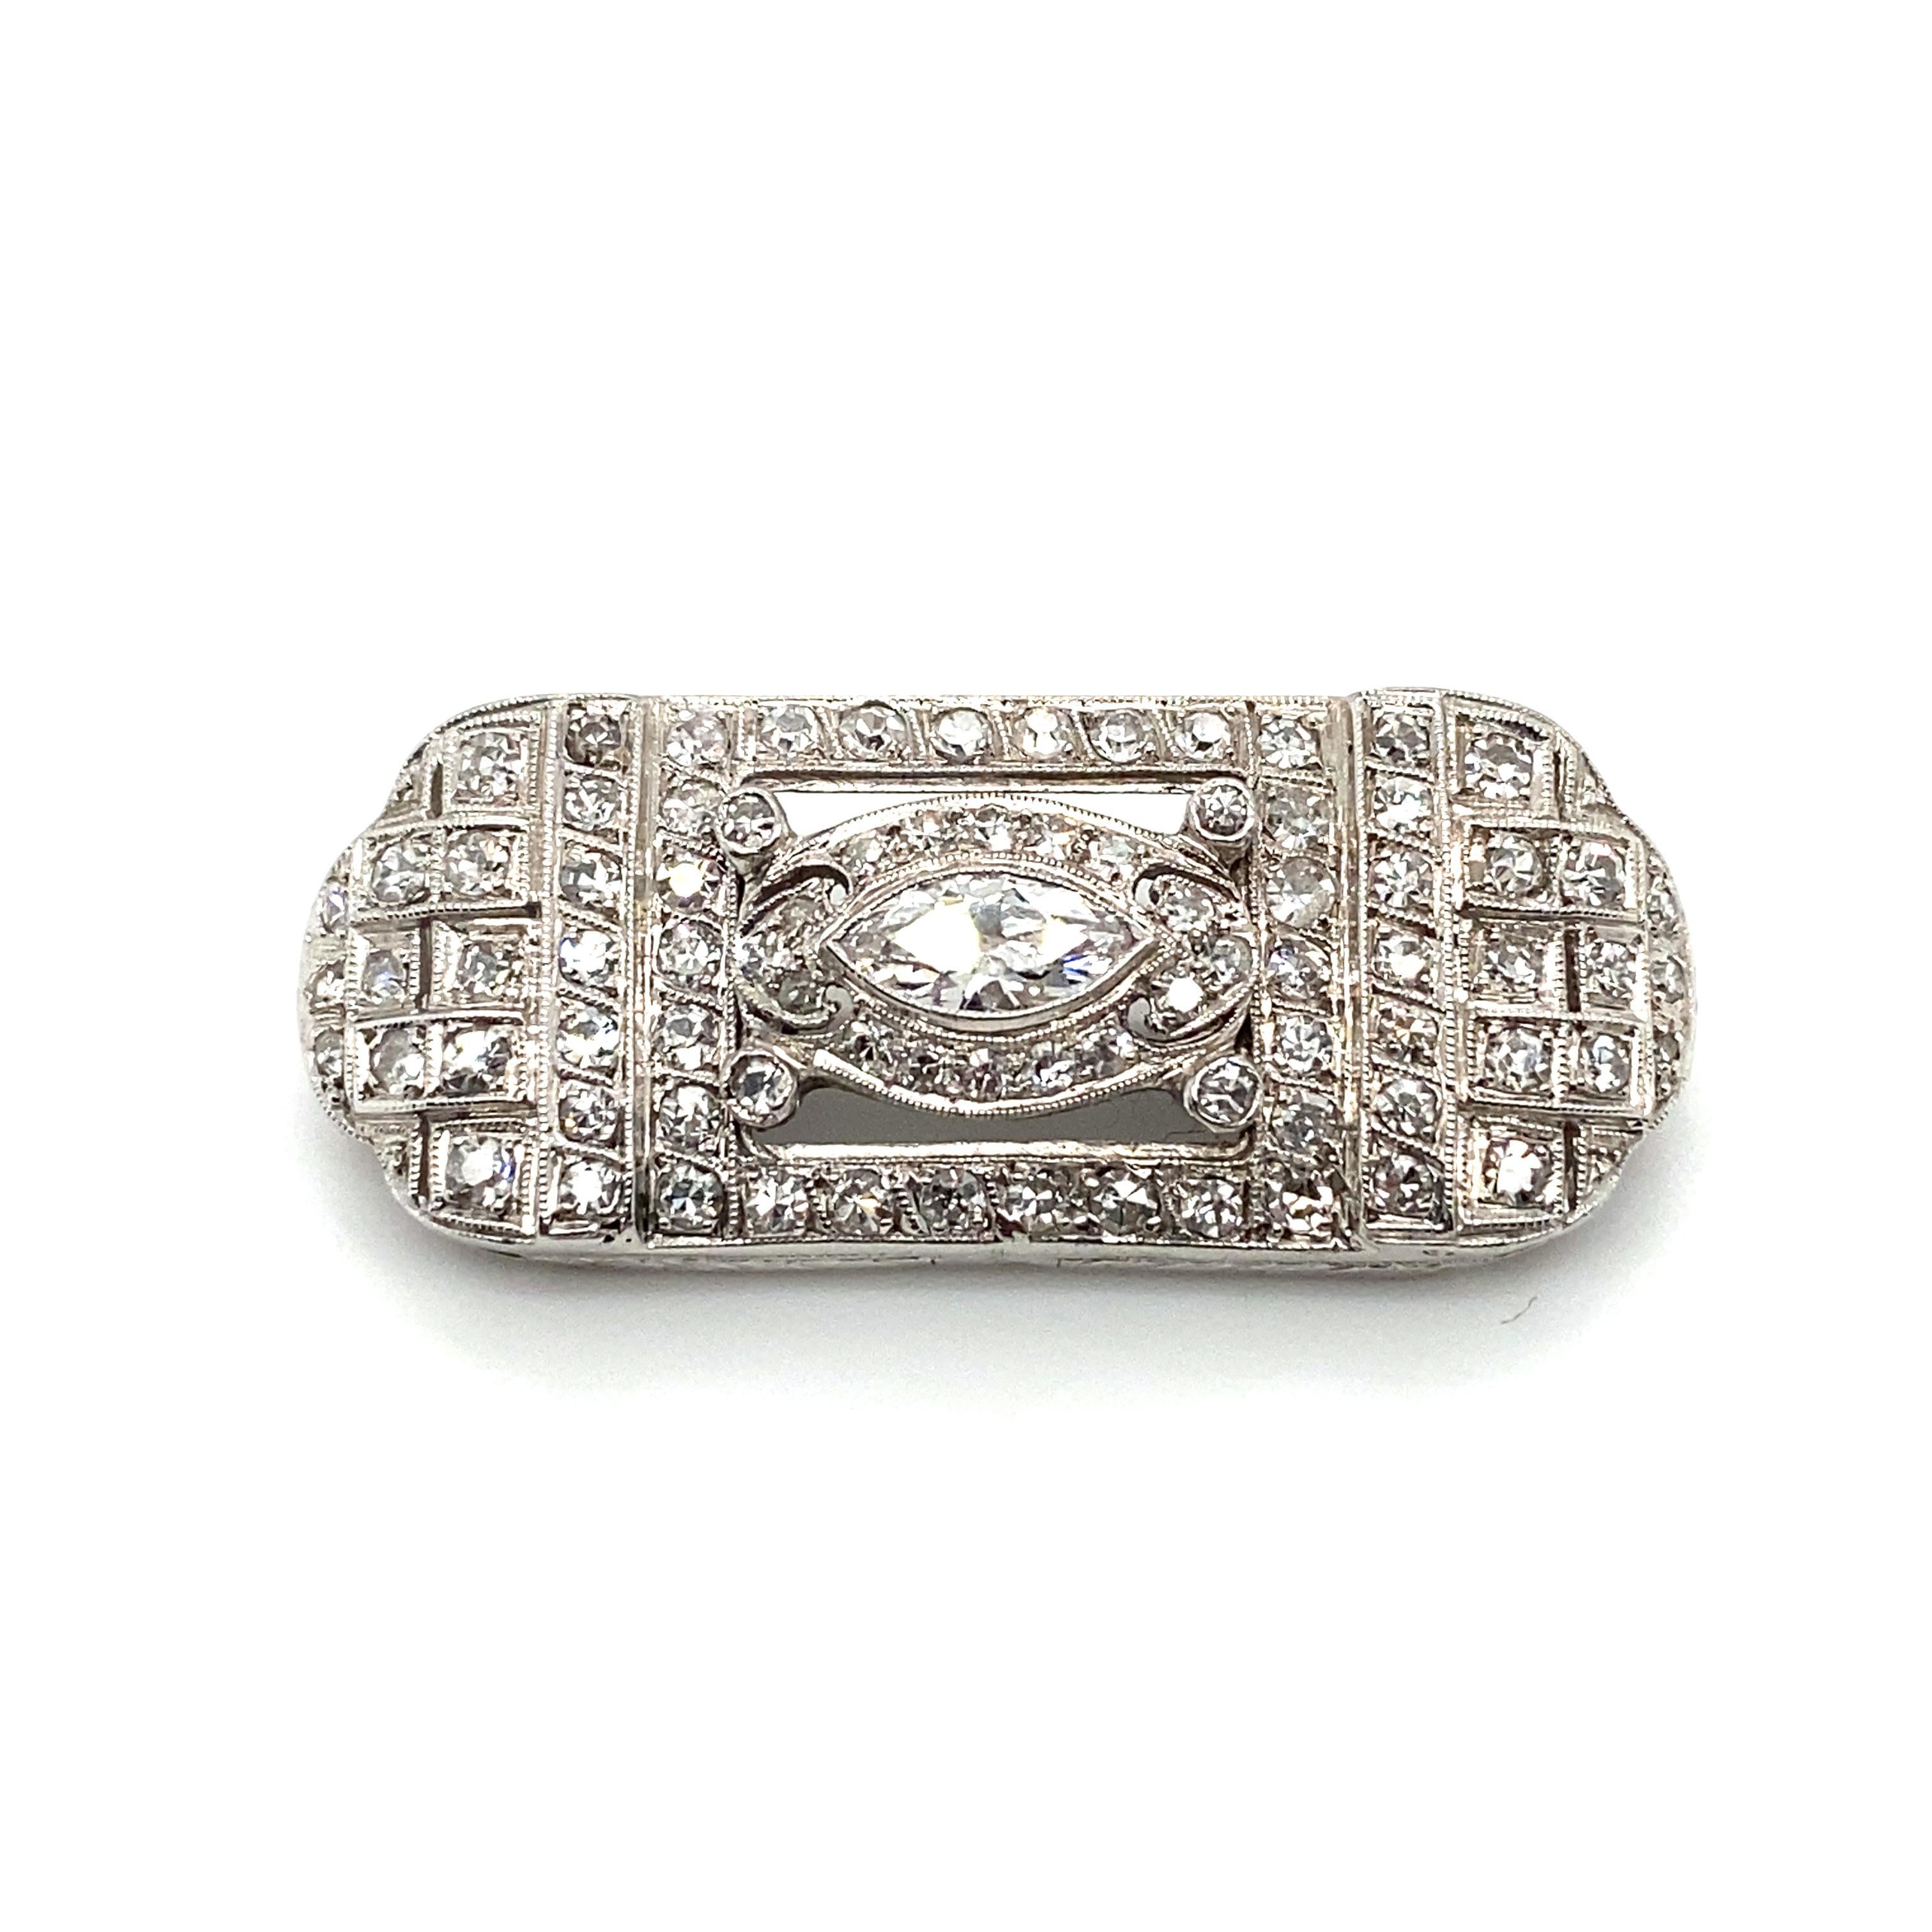 Item Details: This antique brooch has an Art Deco design and is studded with diamonds at two carats total. The diamonds are a mix of marquise and old European cut. Crafted in Platinum, this is an exquisite 1920s brooch with character and charm!